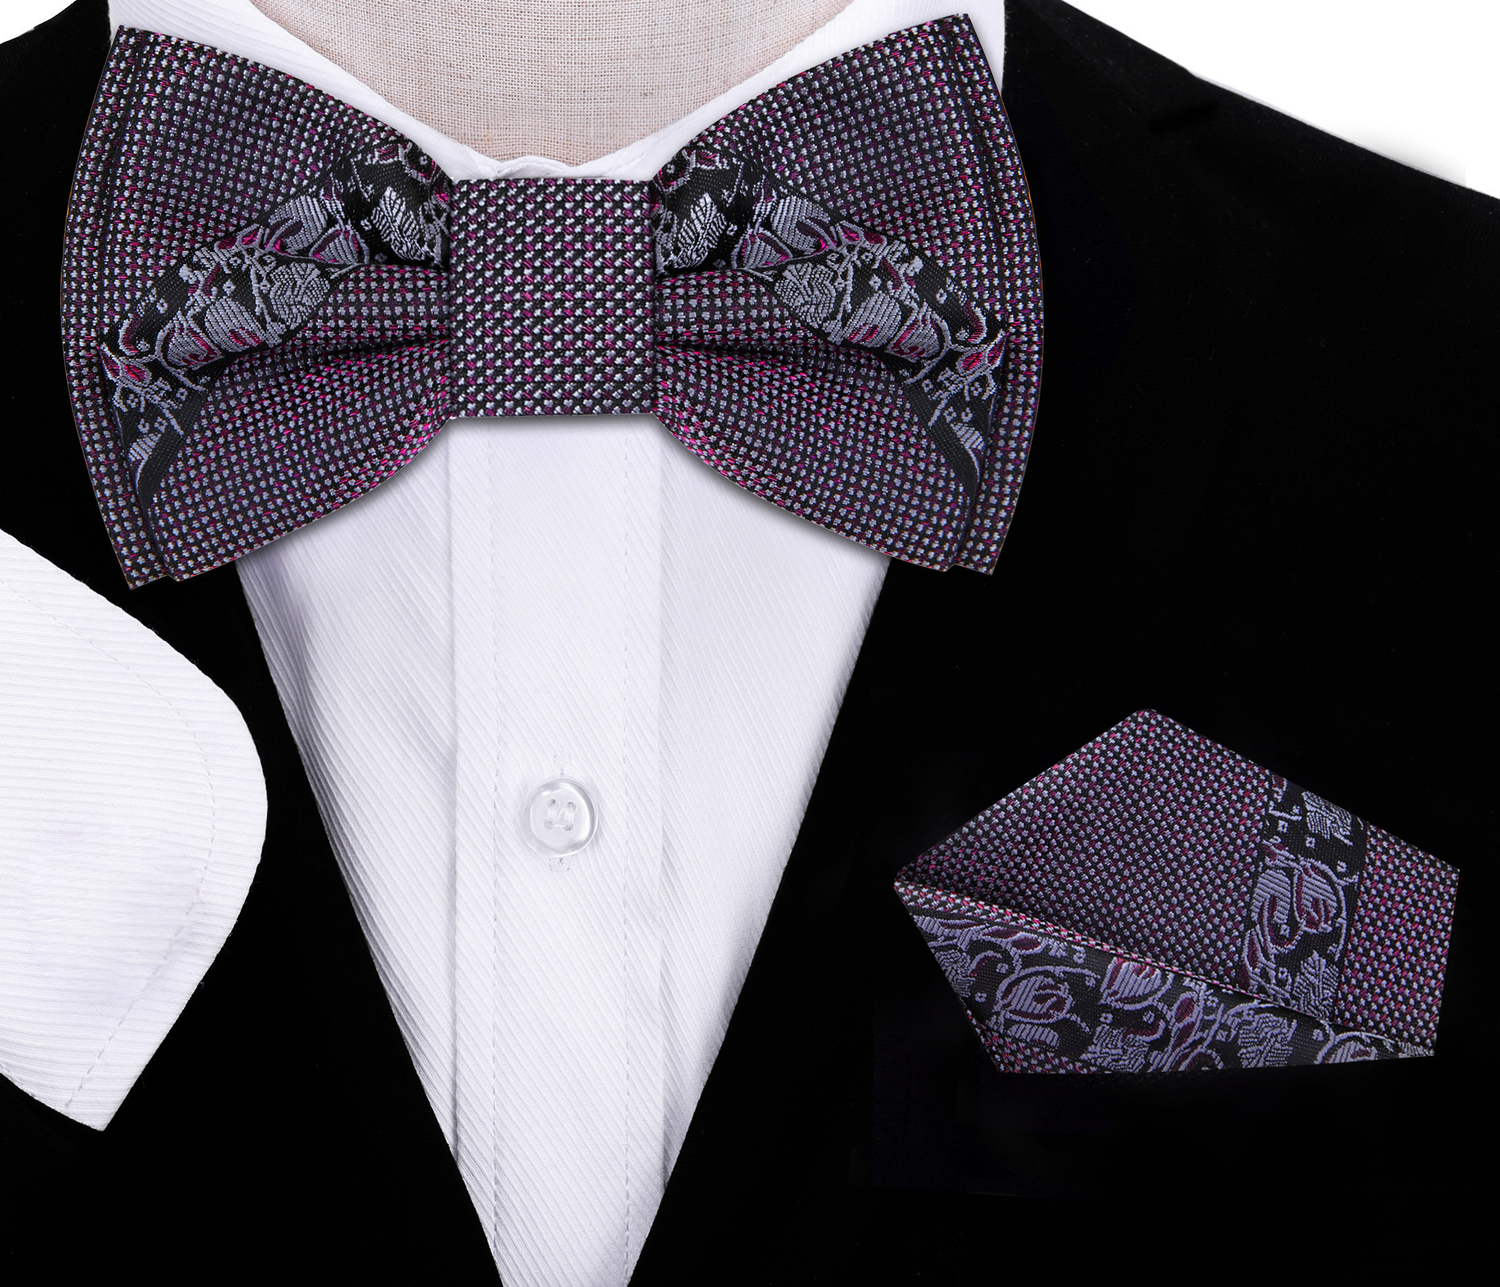 A Metallic Purple, Black Color With Intricate Floral Pattern Silk Kids Pre-Tied Bow Tie, Matching Pocket Square On Suit